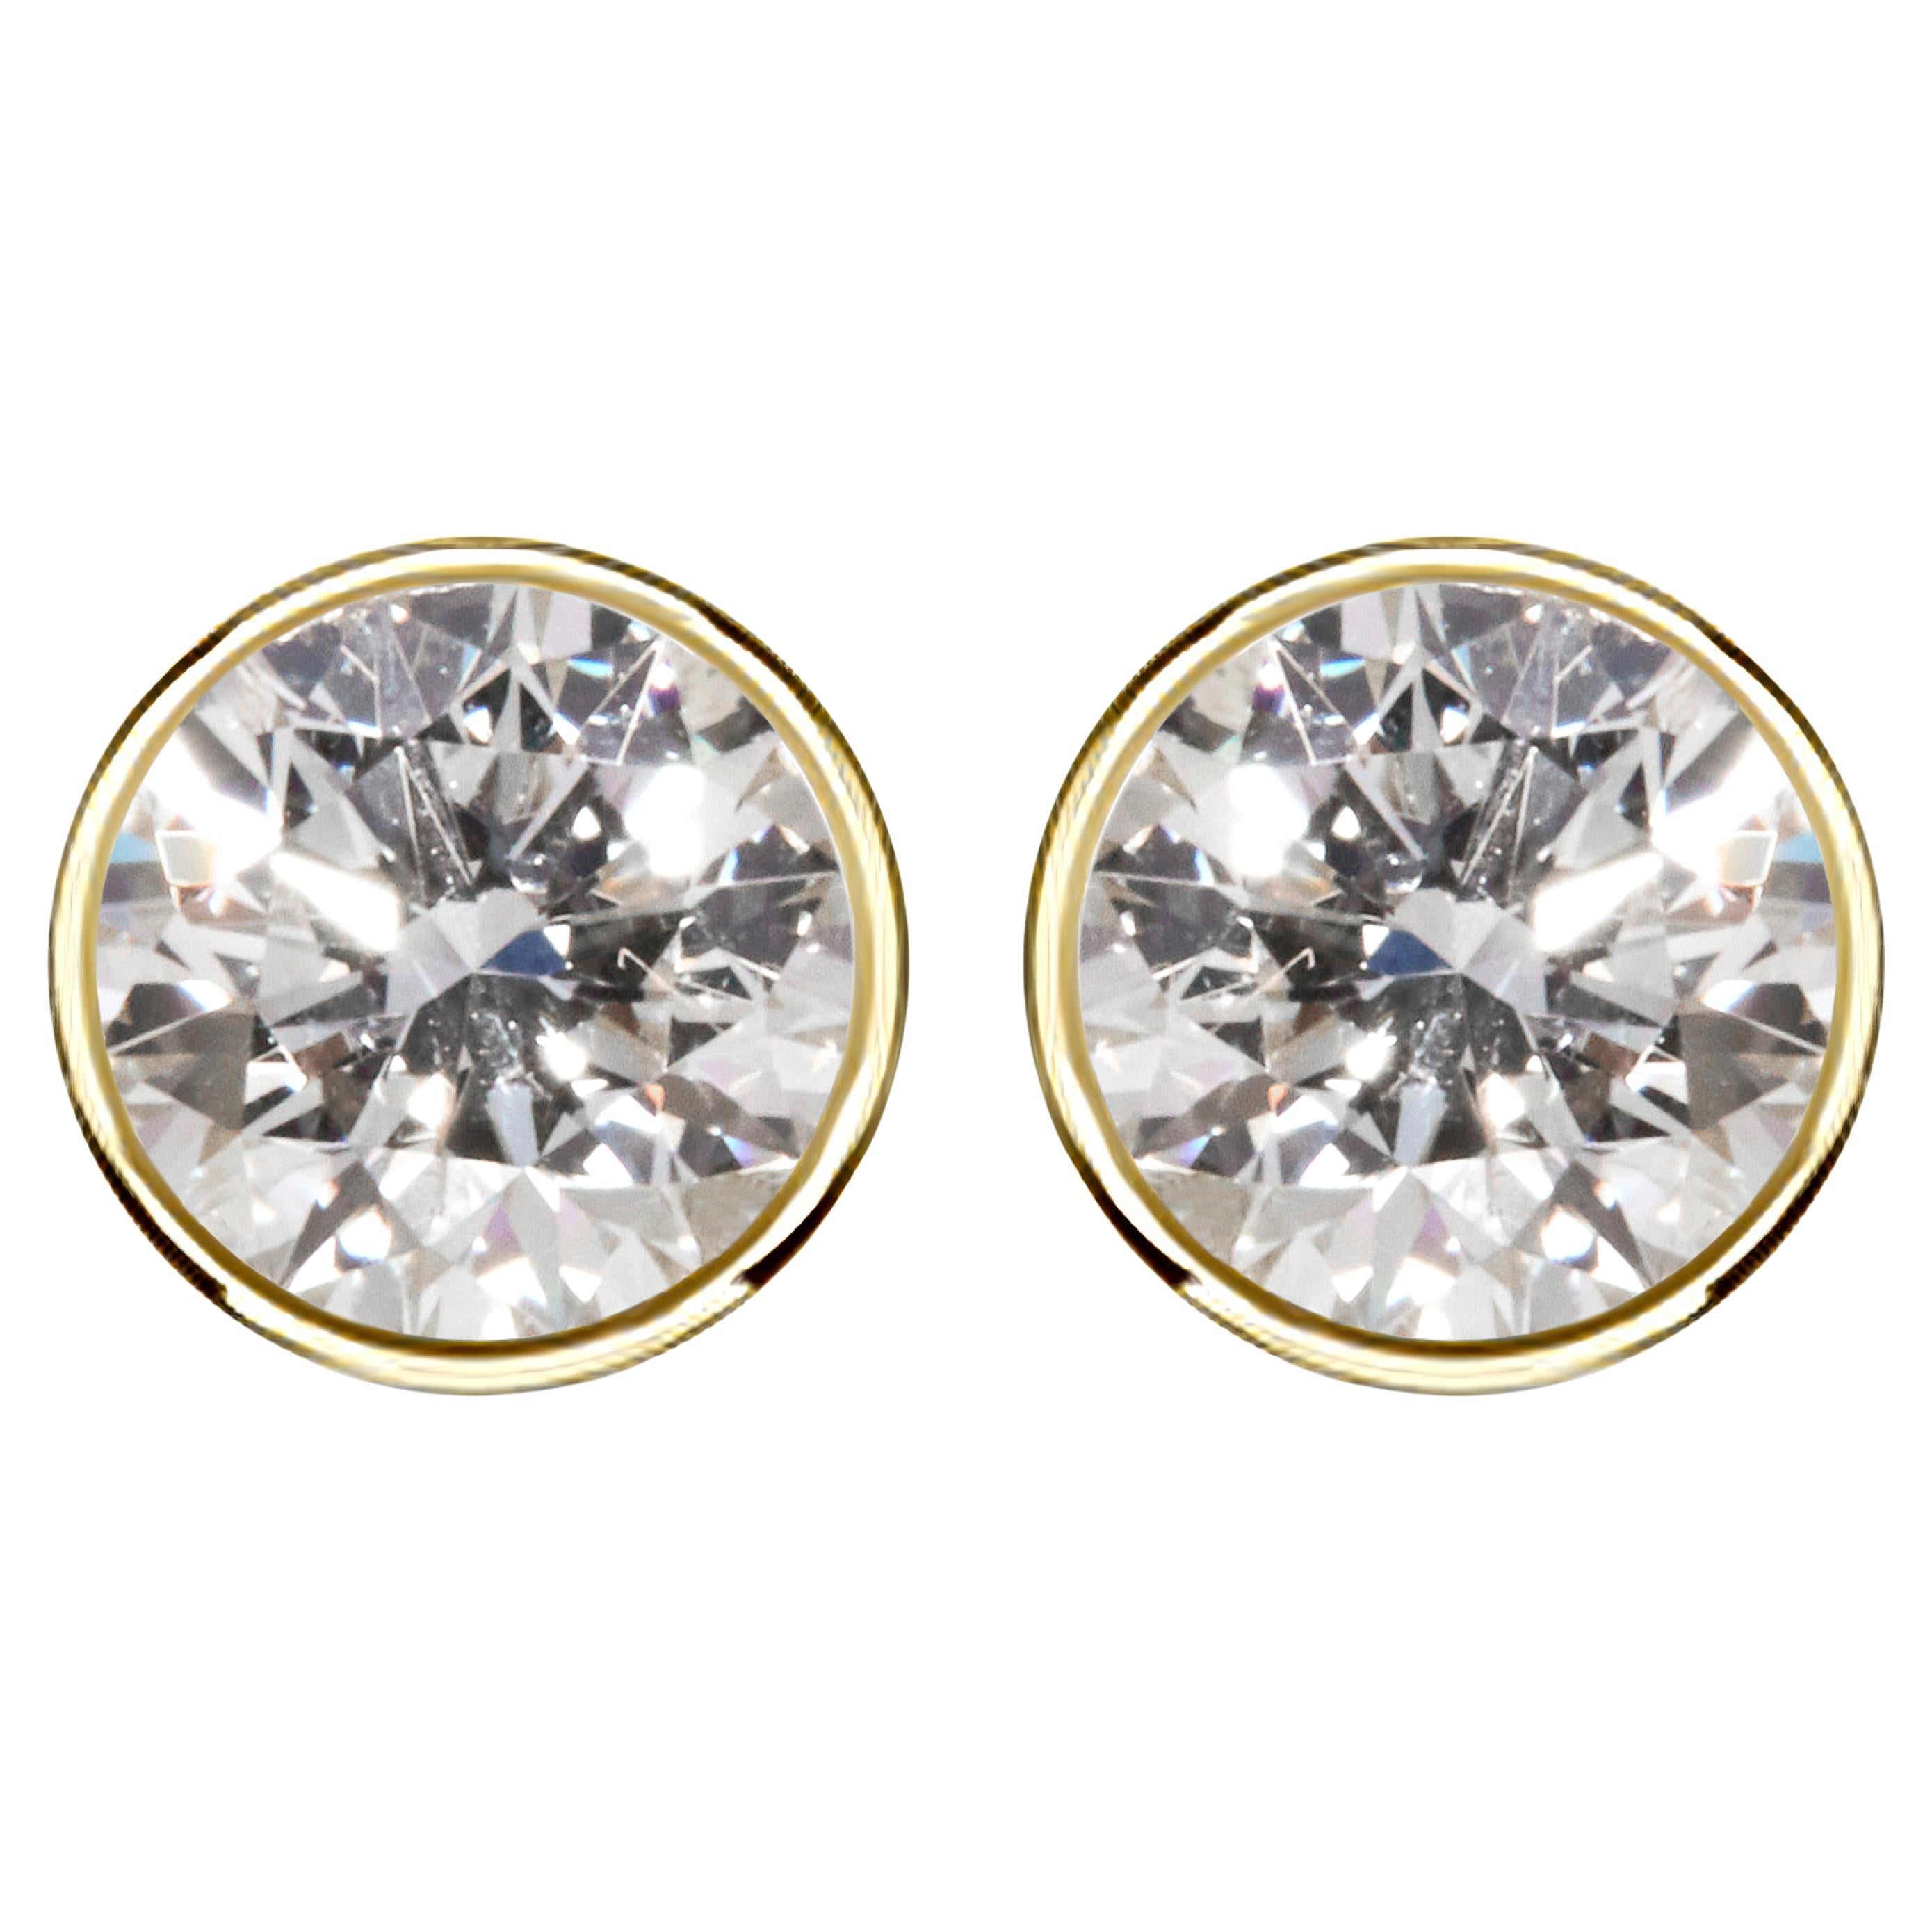 Near 1 Carat Ct 2 Natural Real Solitaire Diamond Stud Earrings 14k Yellow Gold For Sale